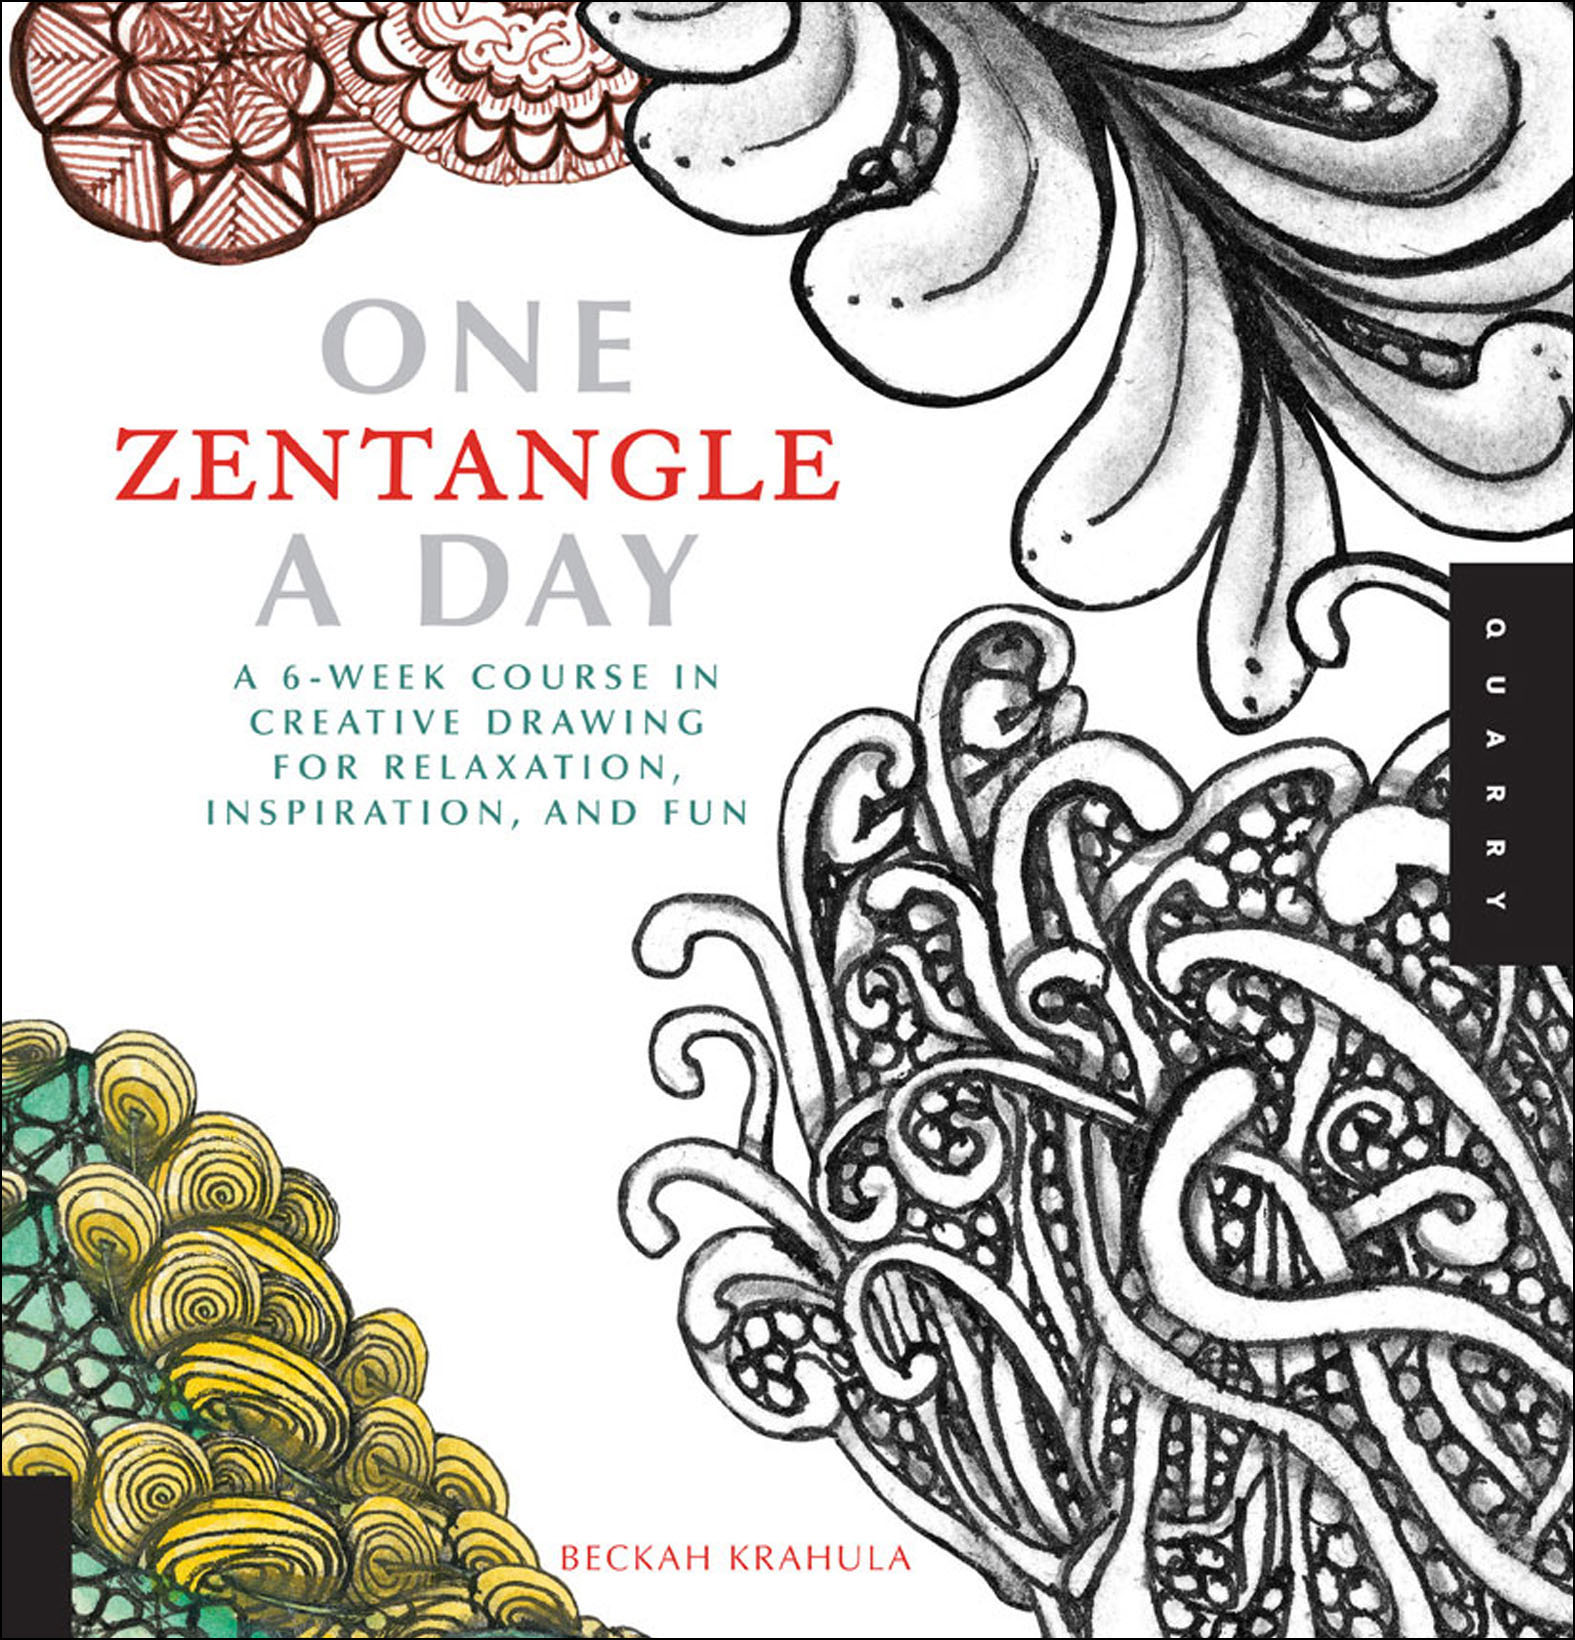 One Zentangle a Day - 15-24.99